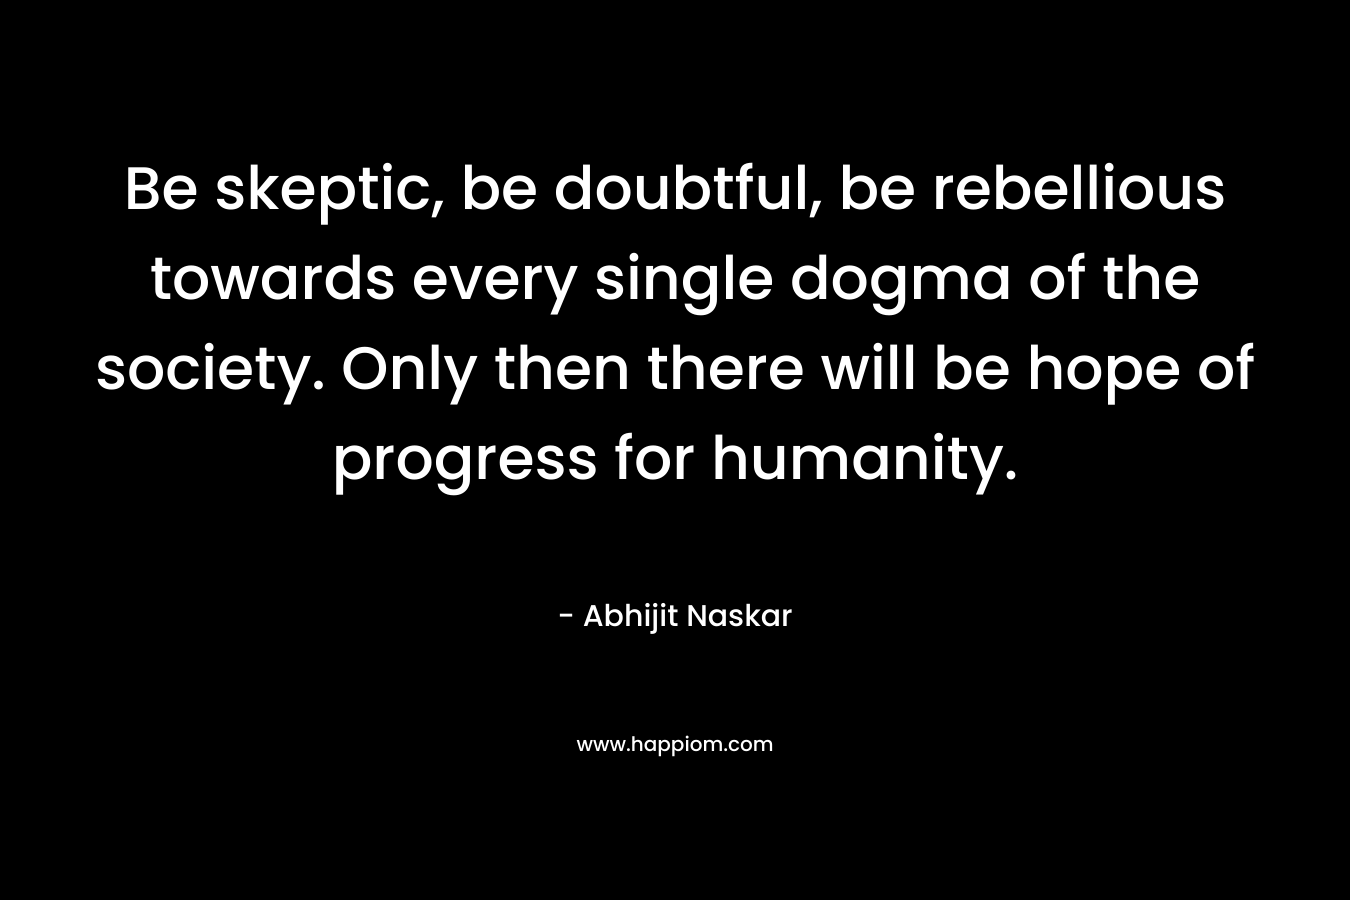 Be skeptic, be doubtful, be rebellious towards every single dogma of the society. Only then there will be hope of progress for humanity. – Abhijit Naskar